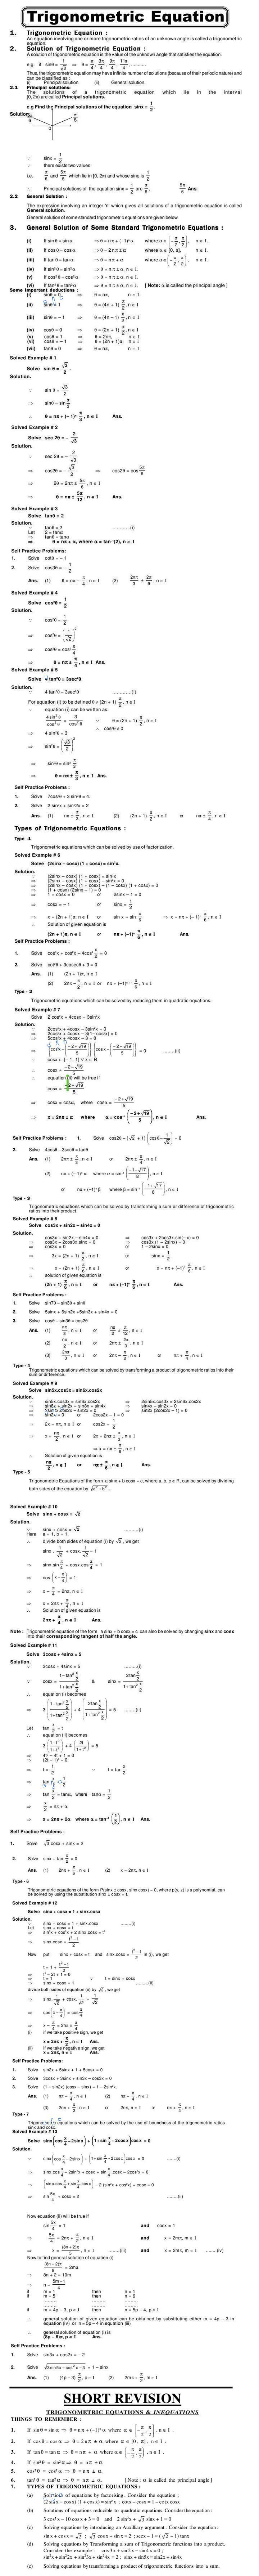 Maths Study Material - Chapter 23